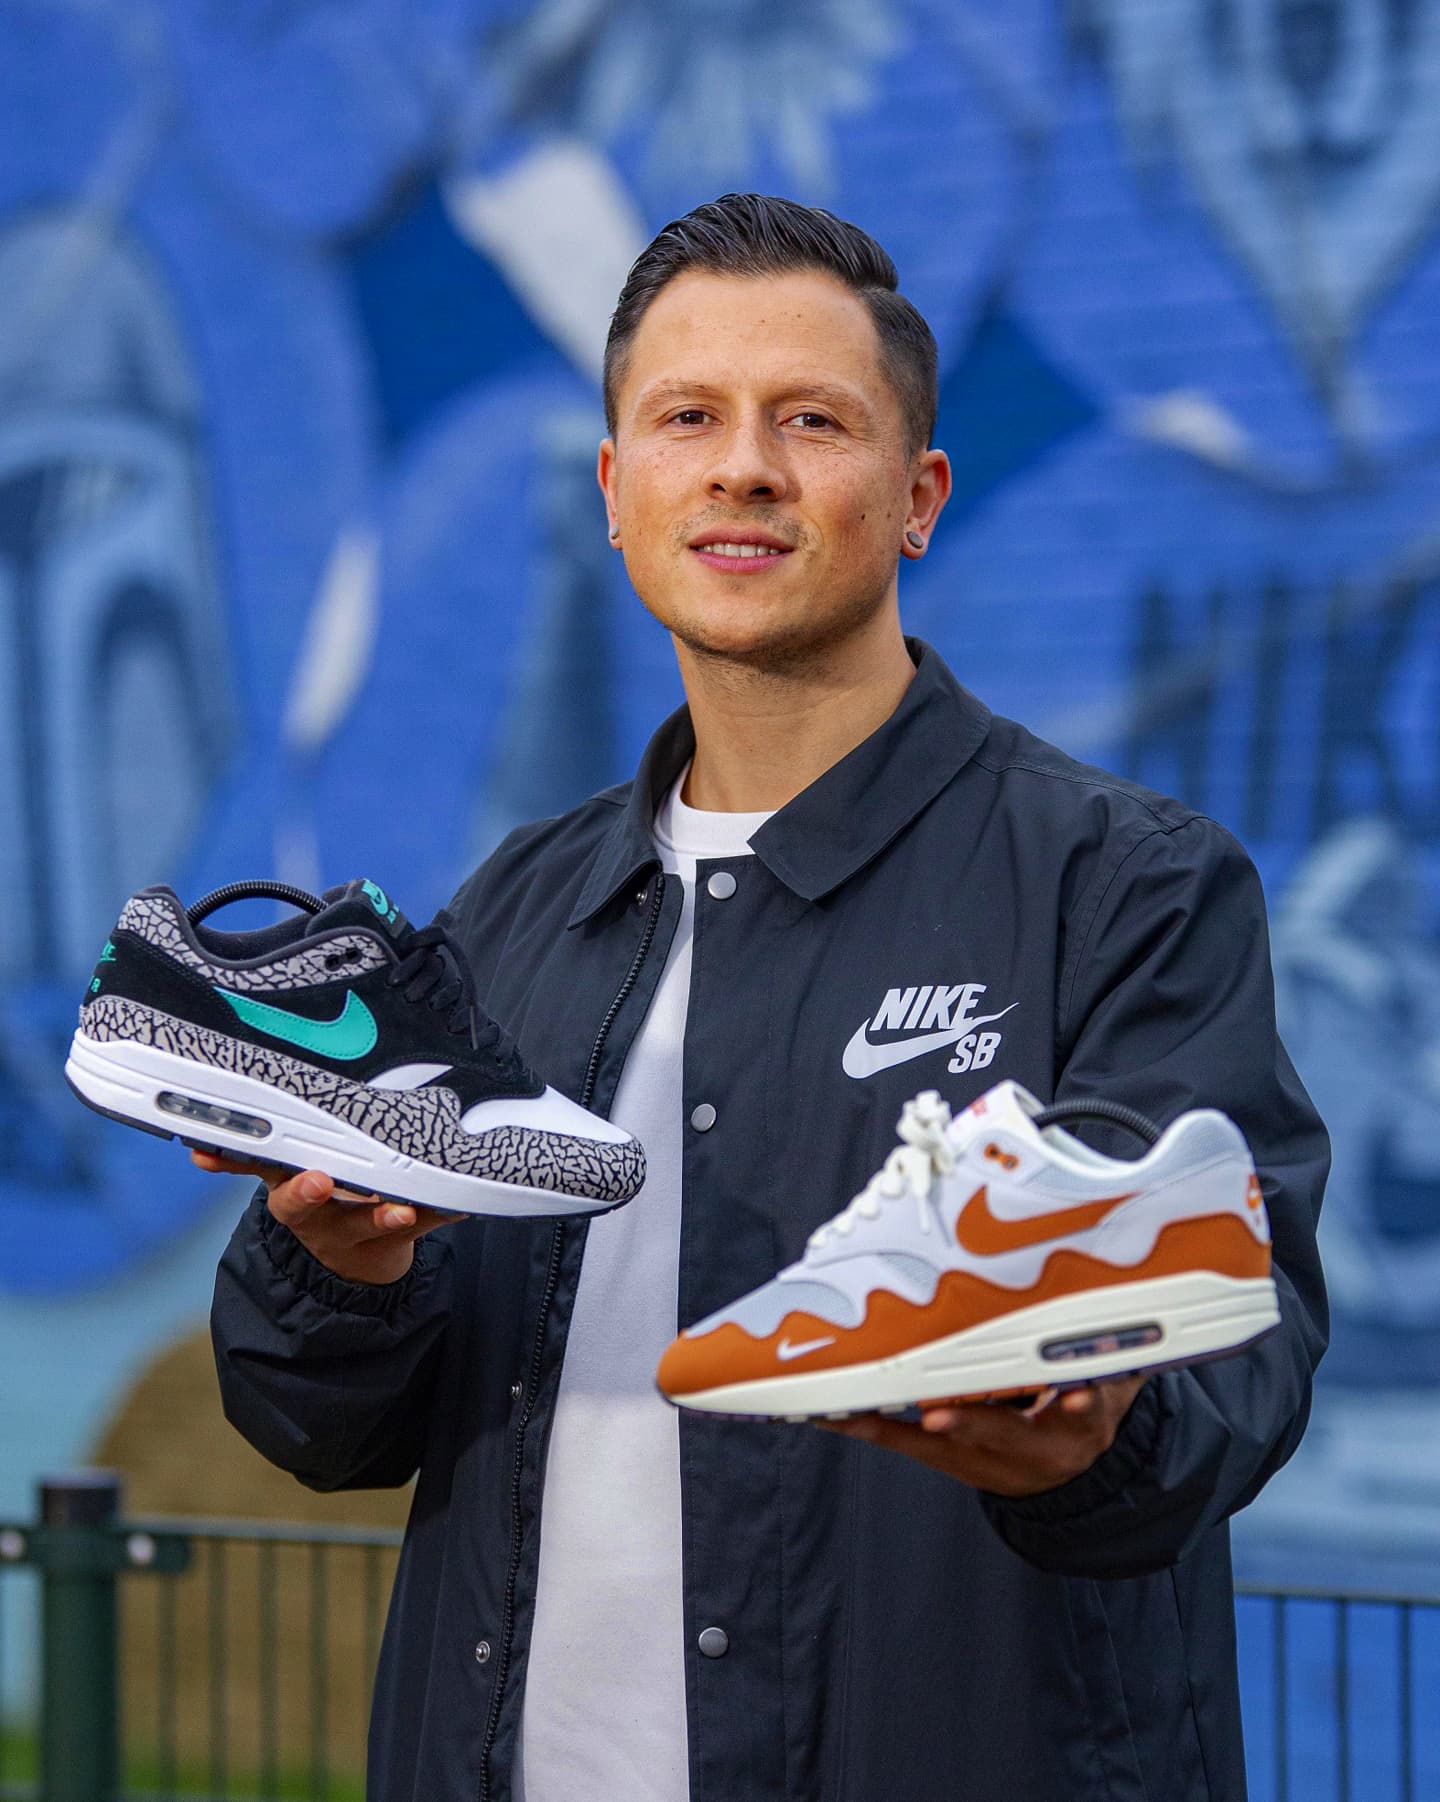 How to Style the Nike Air Max 1 (2021) - KLEKT Blog